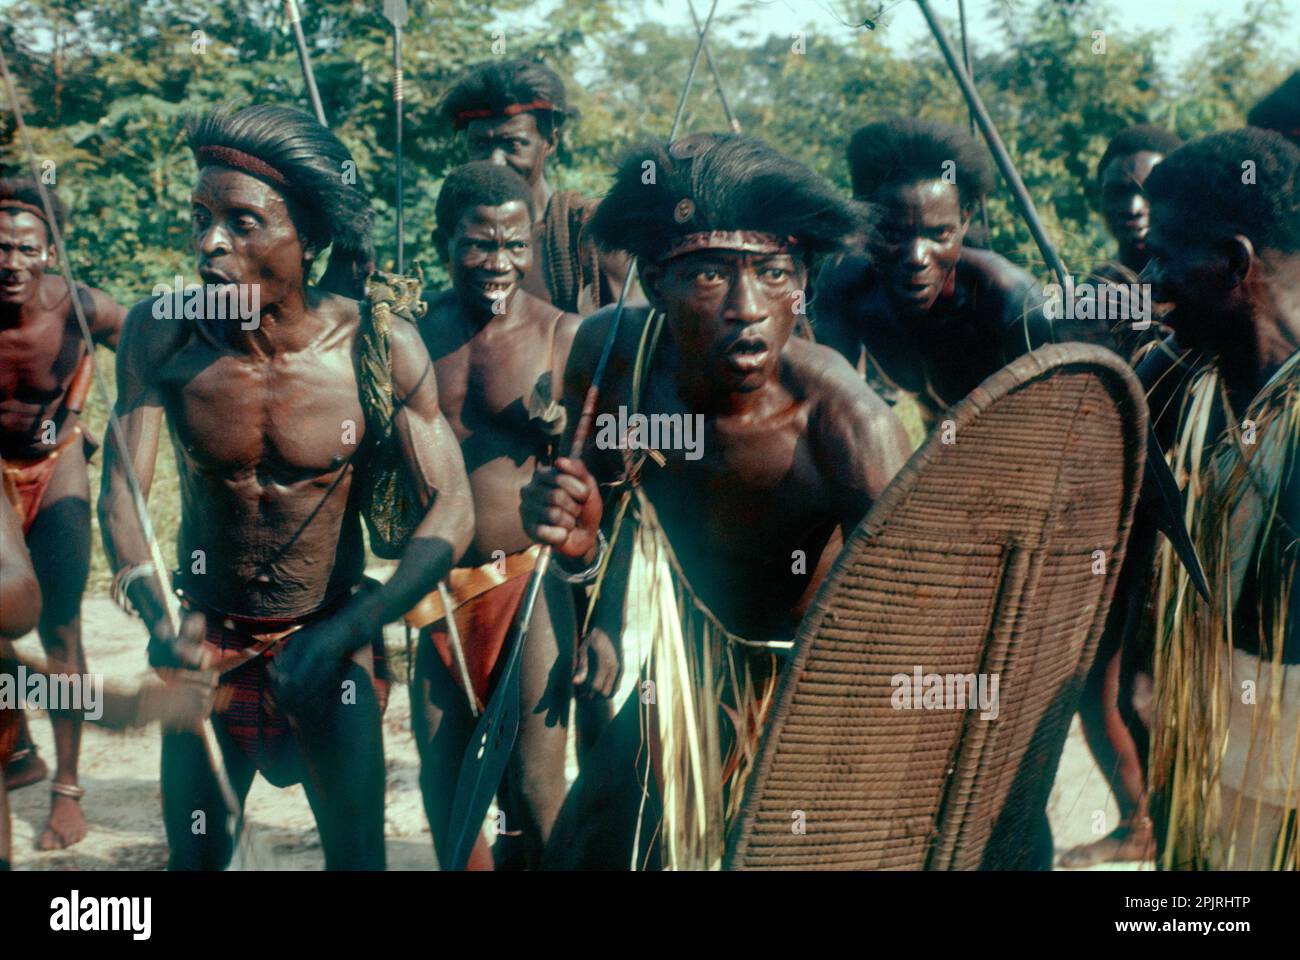 Festivities for the Independence of the Congo,  1960. Men of Kela ethnic group (speaking a Mongo linguage)  dancing with spear and plaited shield. Stock Photo